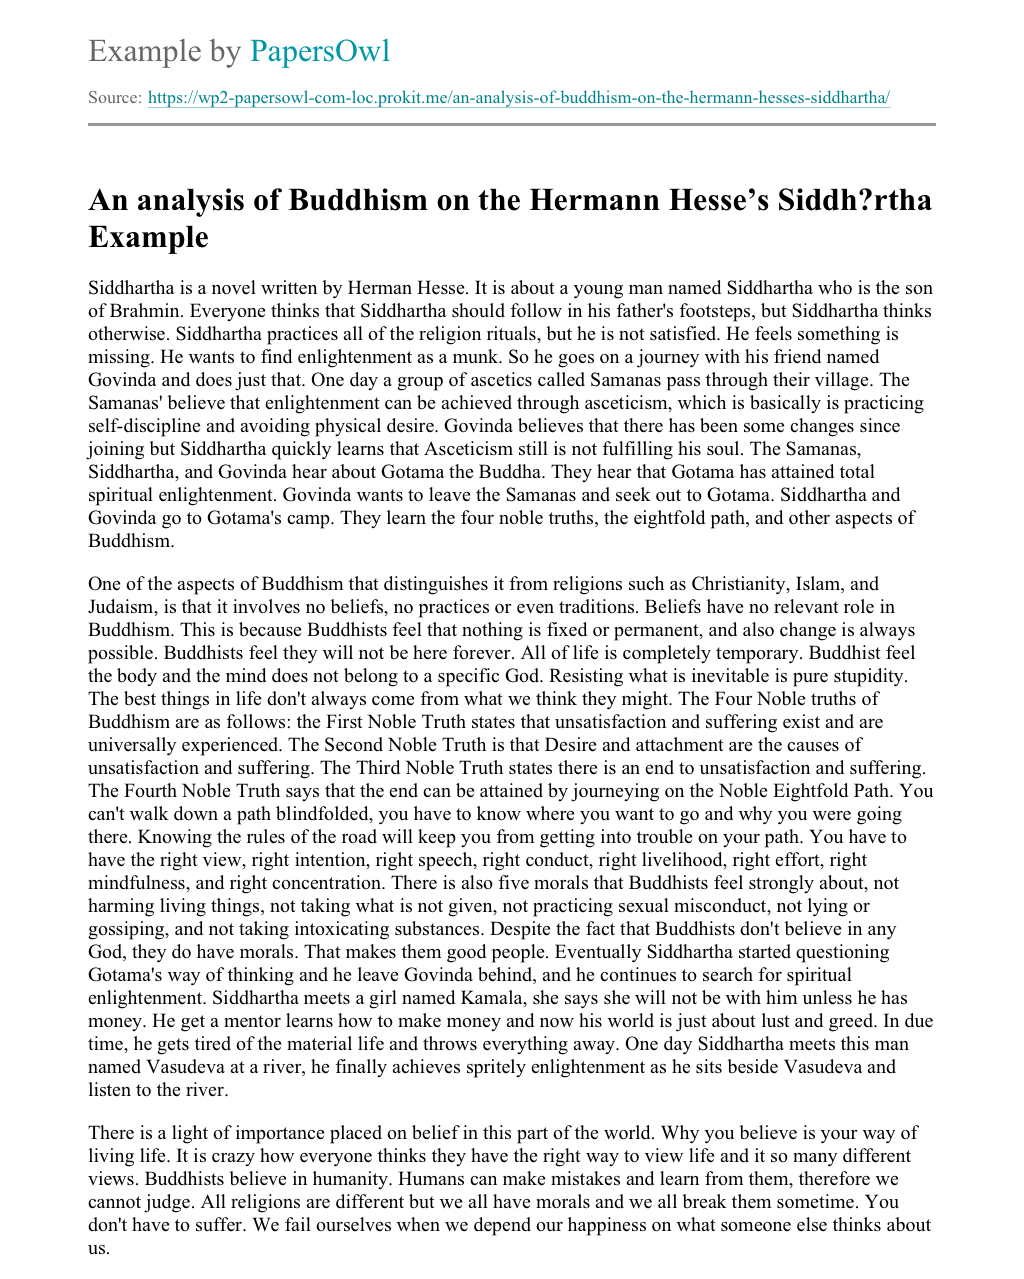 good essay topics about buddhism